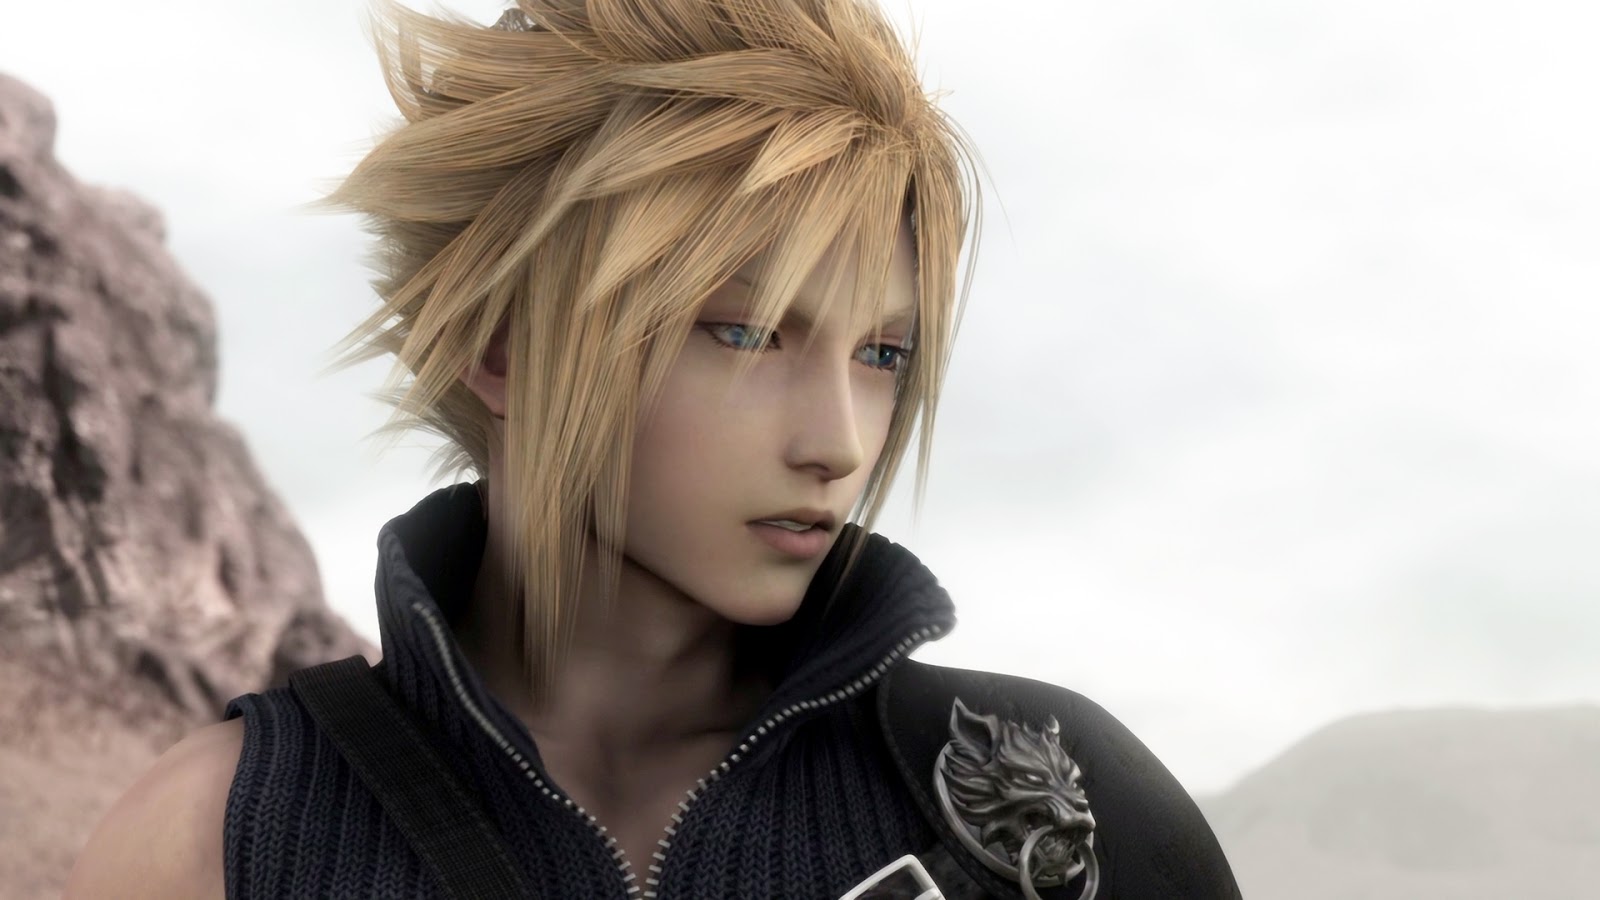 Ultimate Square Enix Members Rewarded With Lightning Artwork - Siliconera